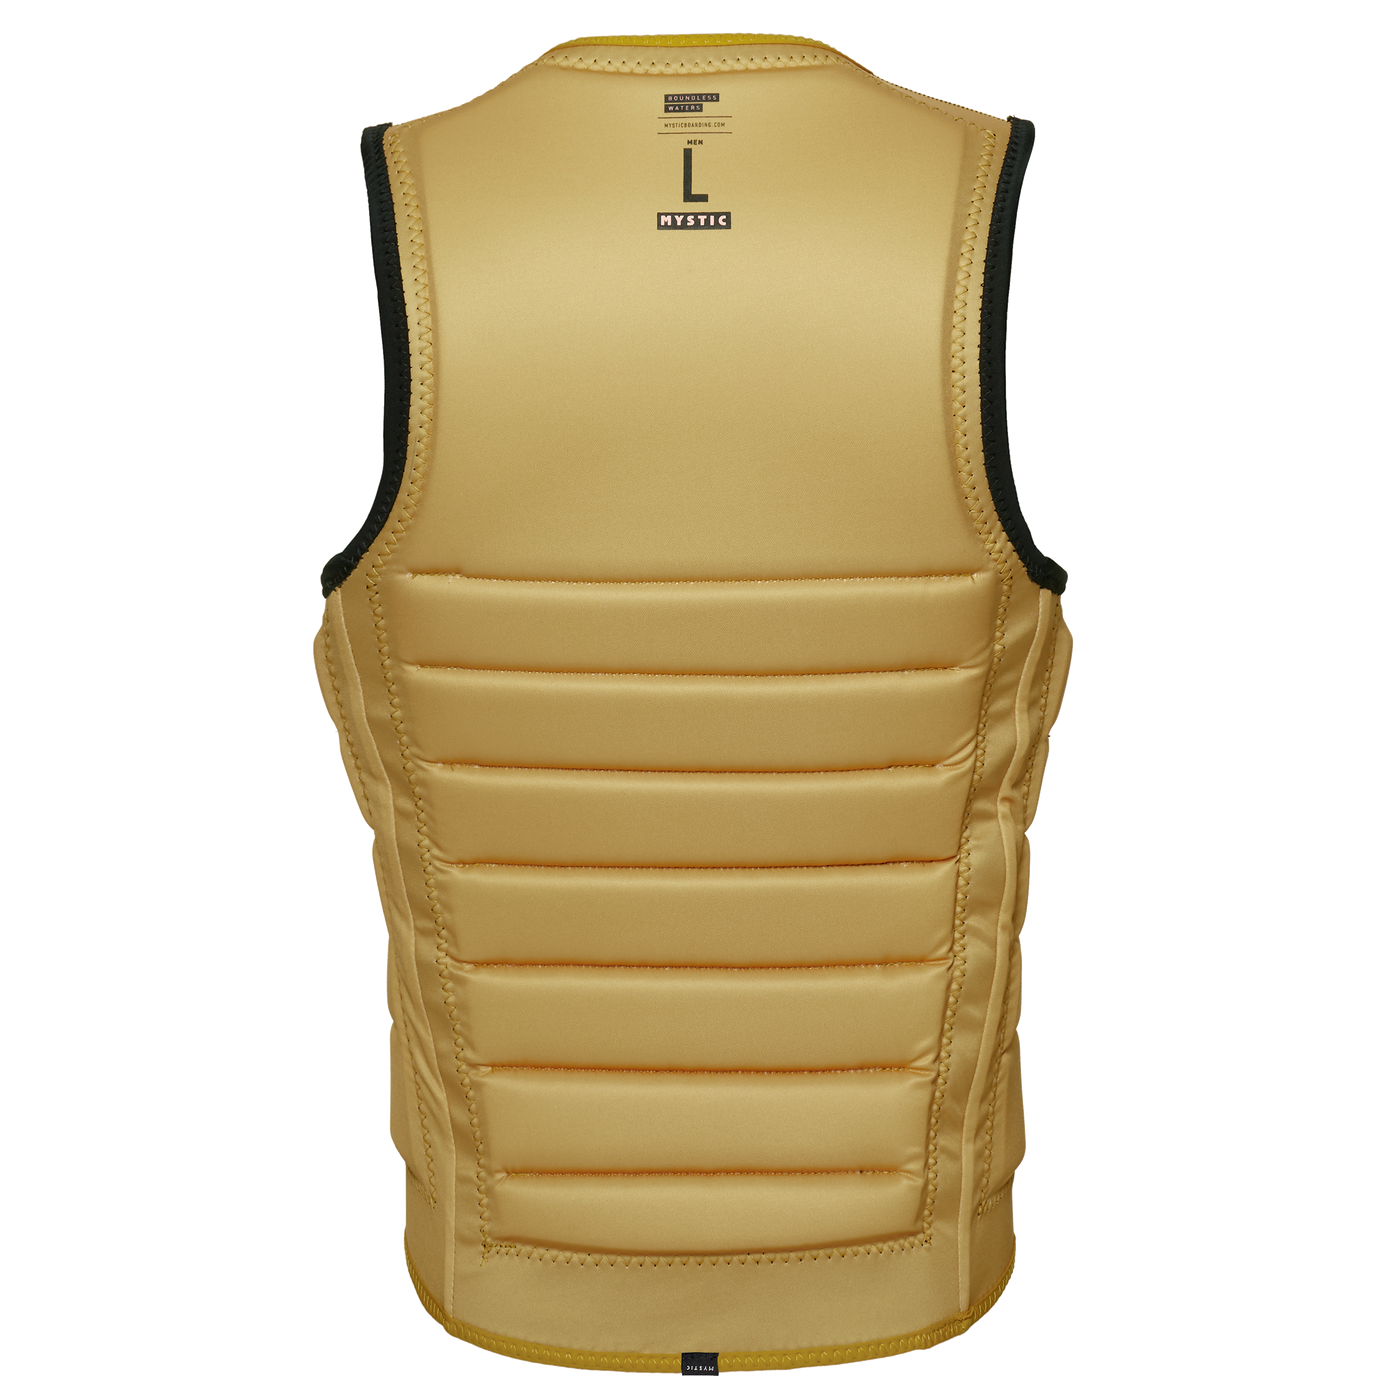 2023- Mystic- The DOM Impact Vest Front Zip- Double sided